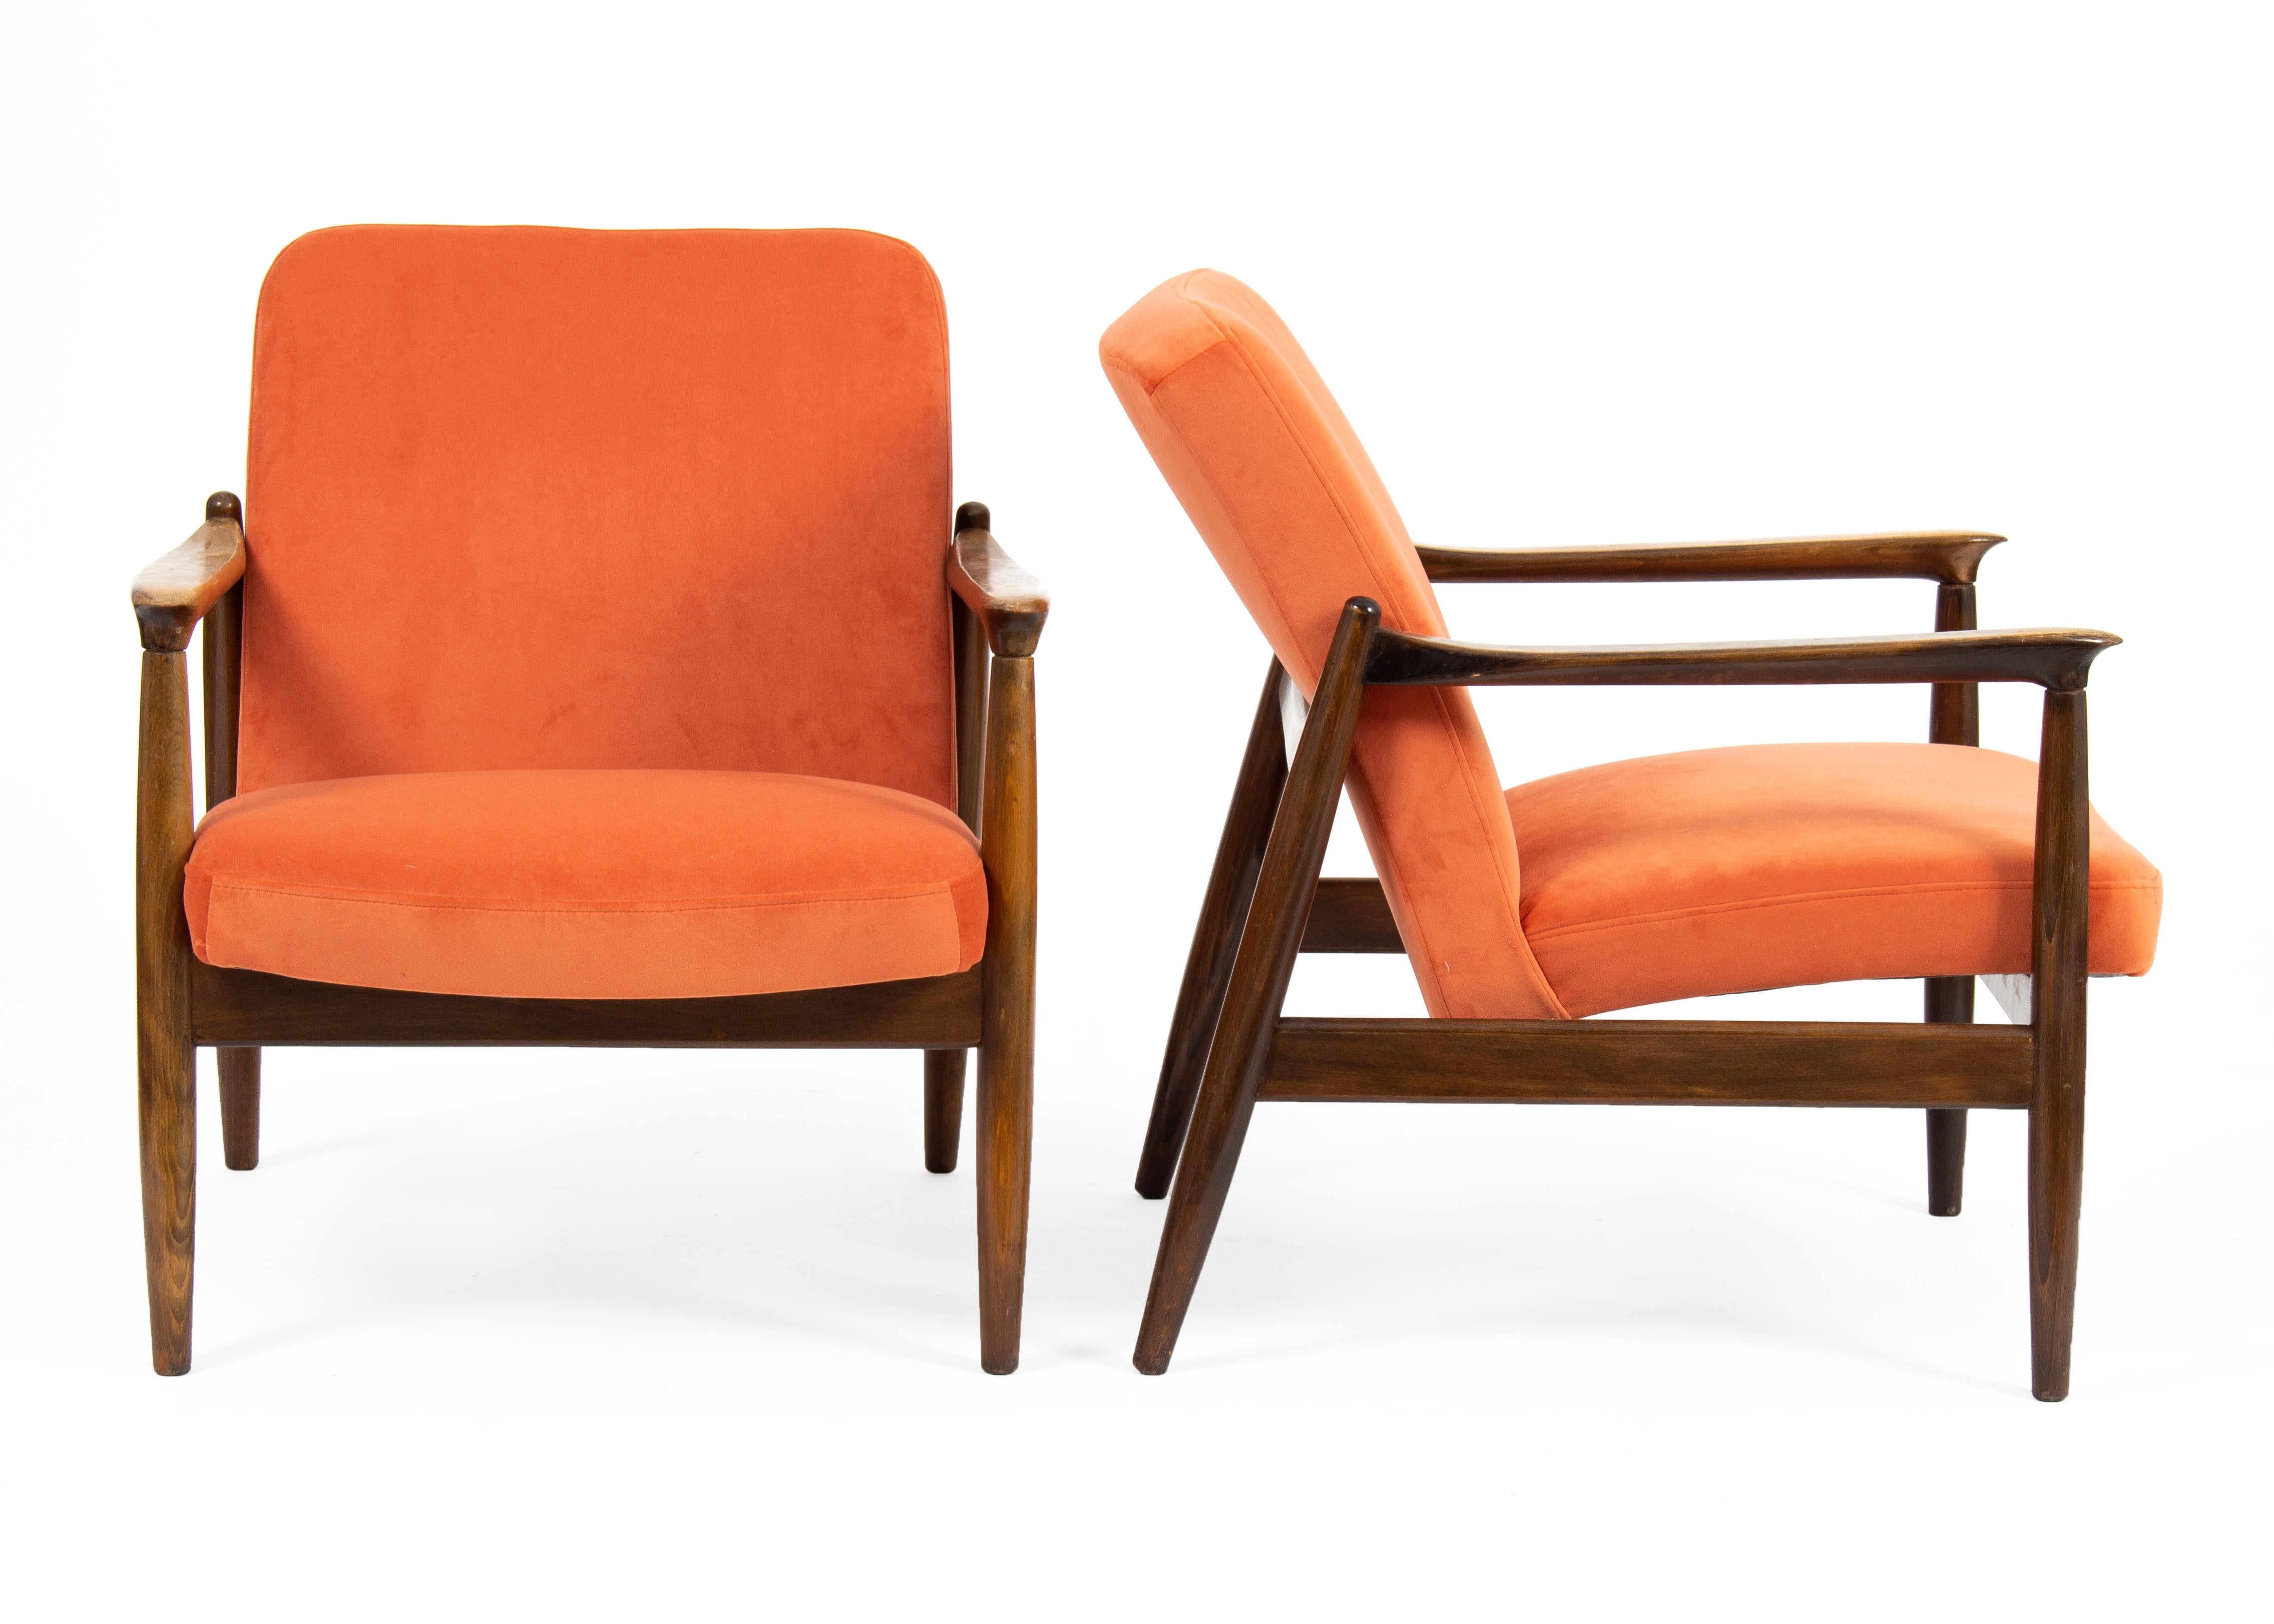 Mid-Century Modern armchairs designed by Edmund Homa in the 1960s in Poland.